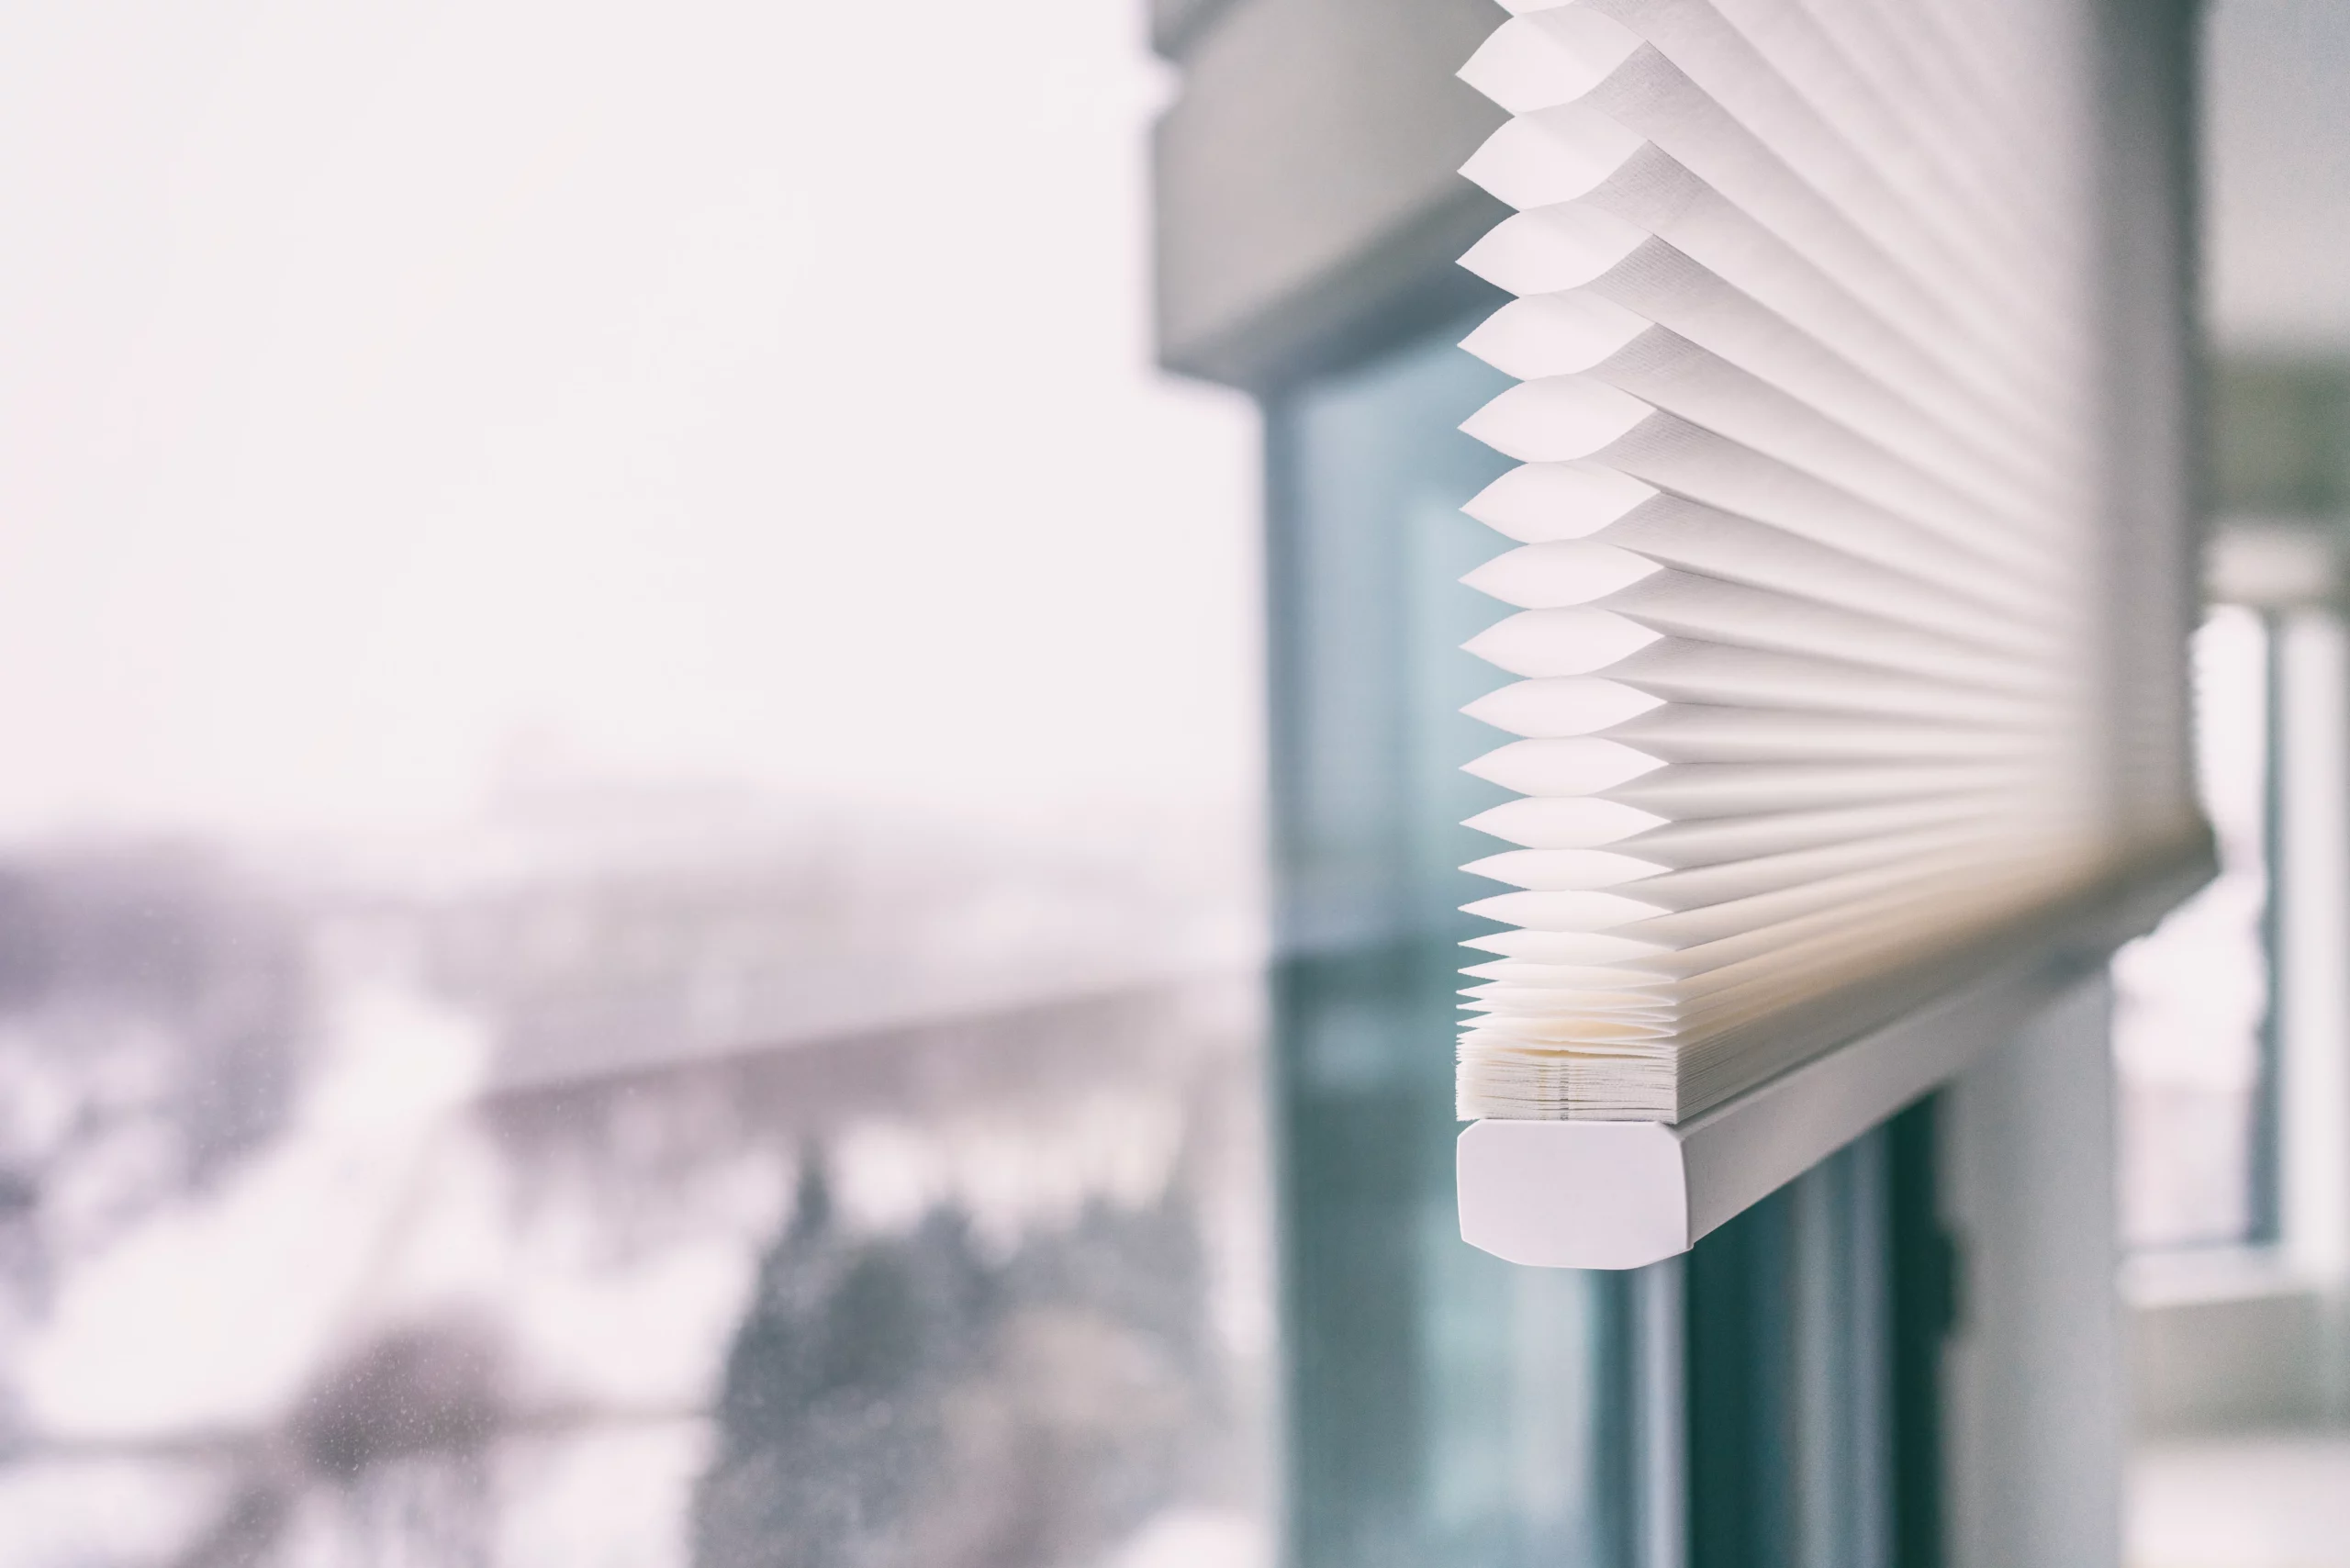 Cheapest ways to heat a house: honeycomb blinds